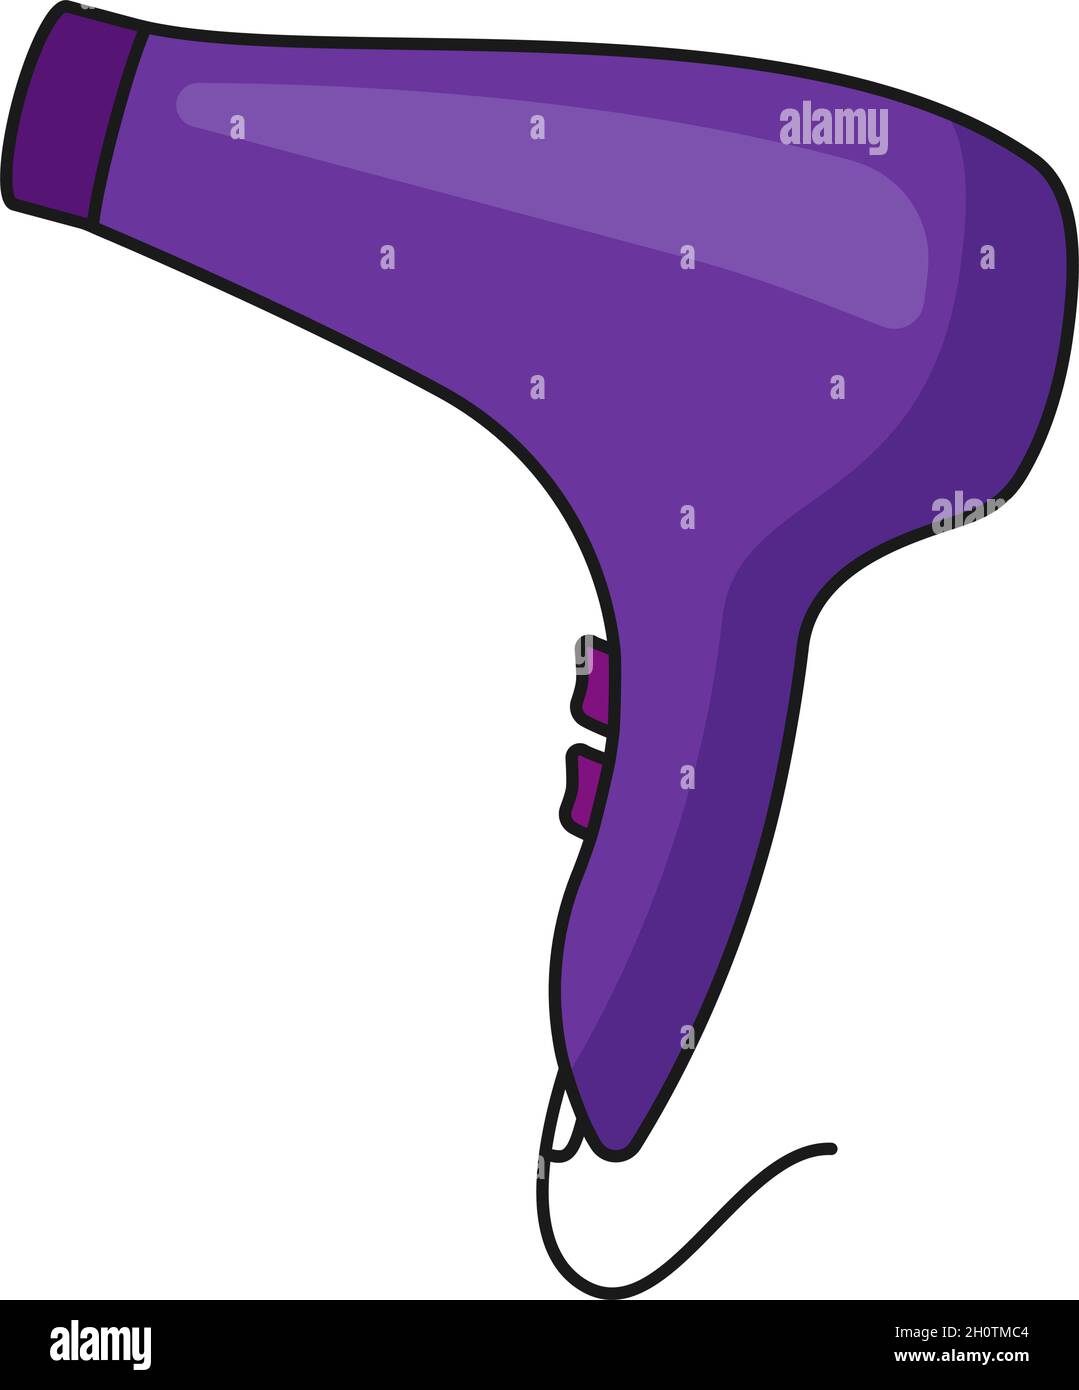 Hair dryer or hairdryer for hair salon blow dry in purple vector icon Stock Vector